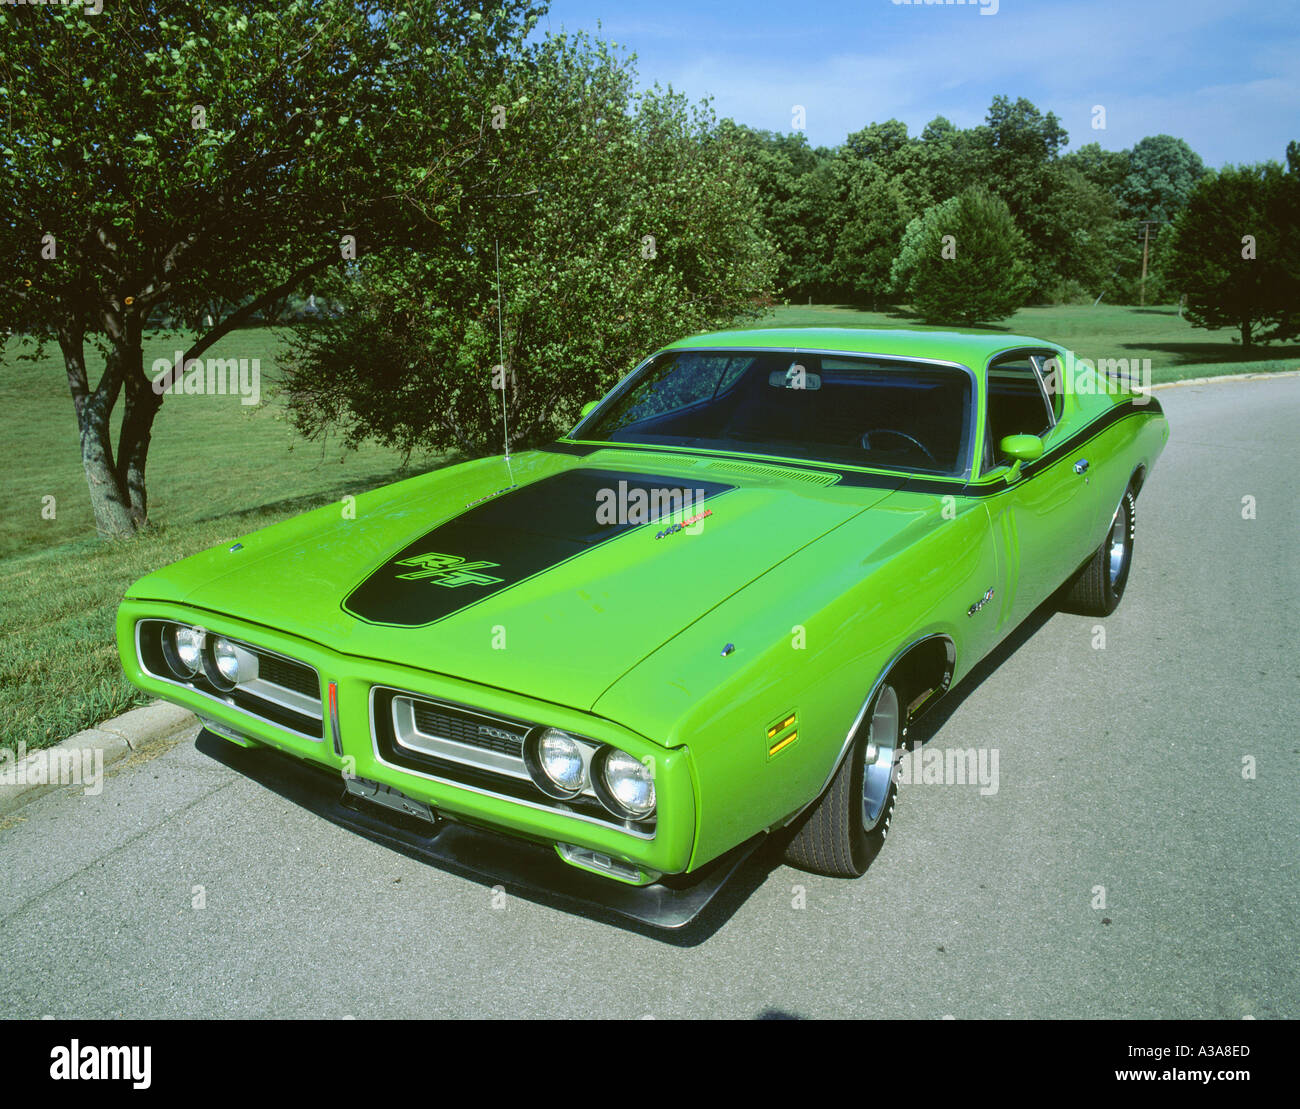 1971 Dodge Charger R T 440 Magnum Stock Photo - Alamy